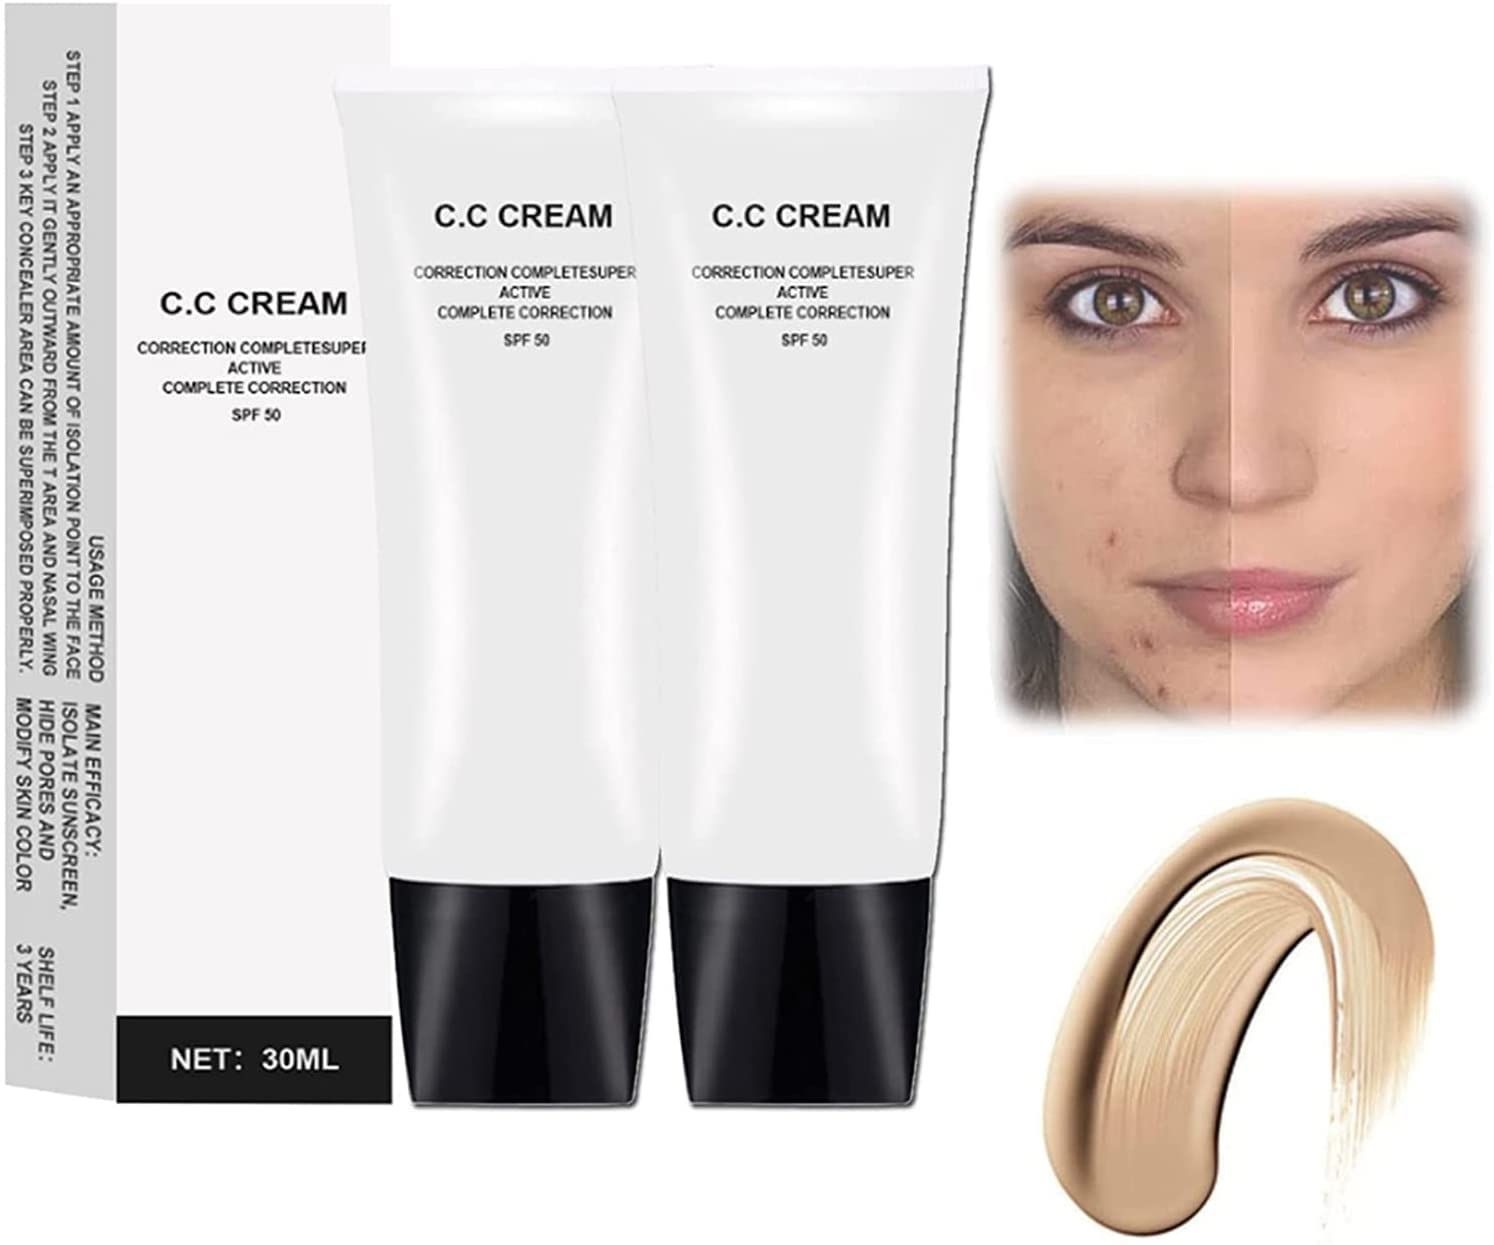 12 best CC creams for light coverage and SPF protection